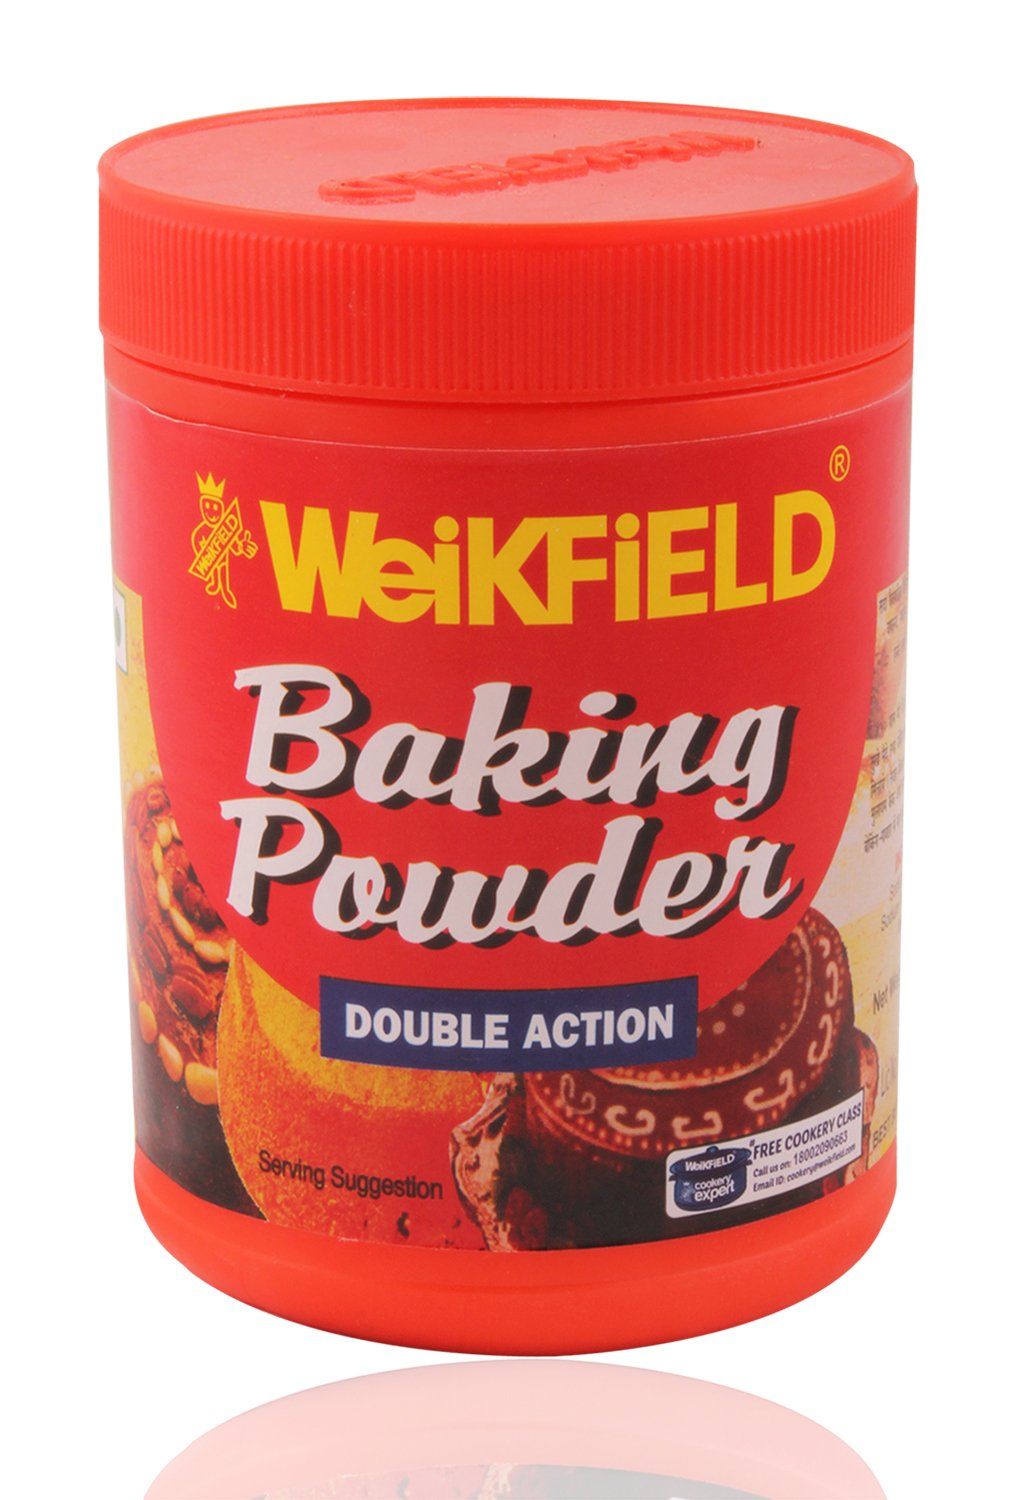 Weikfield Baking Powder Double Action Image